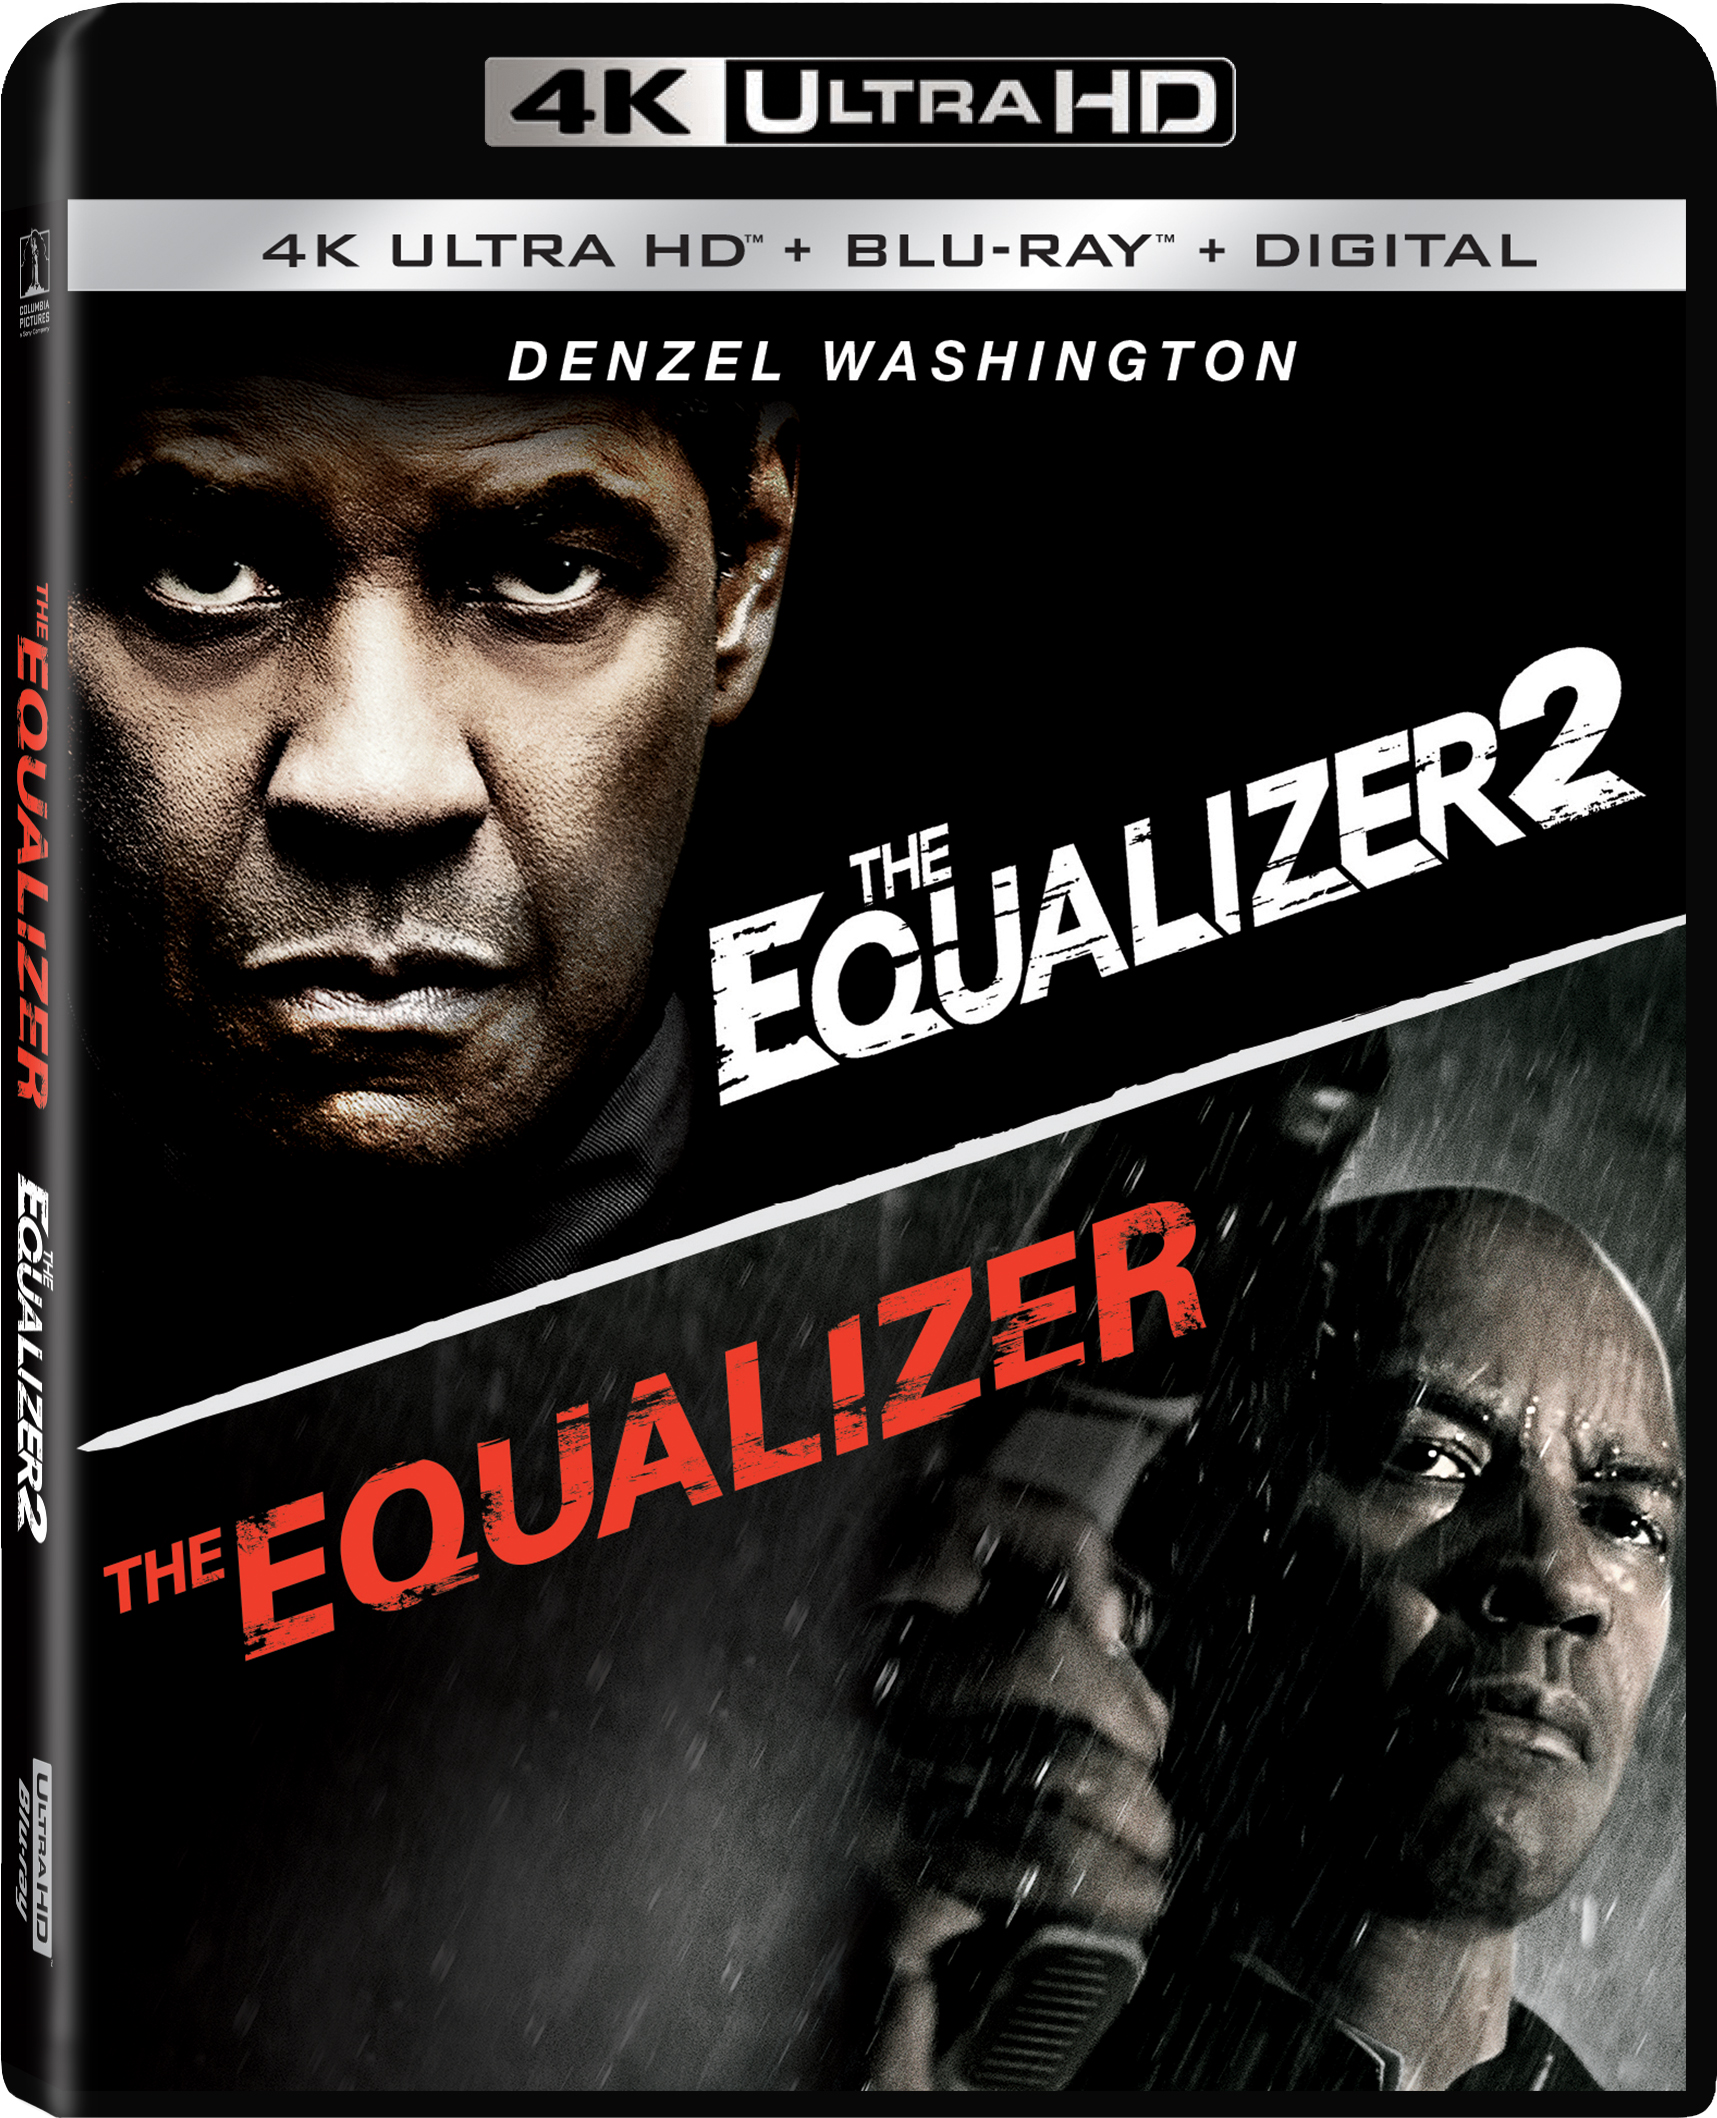 røg Anemone fisk Gurgle The Equalizer (@TheEqualizer) / Twitter